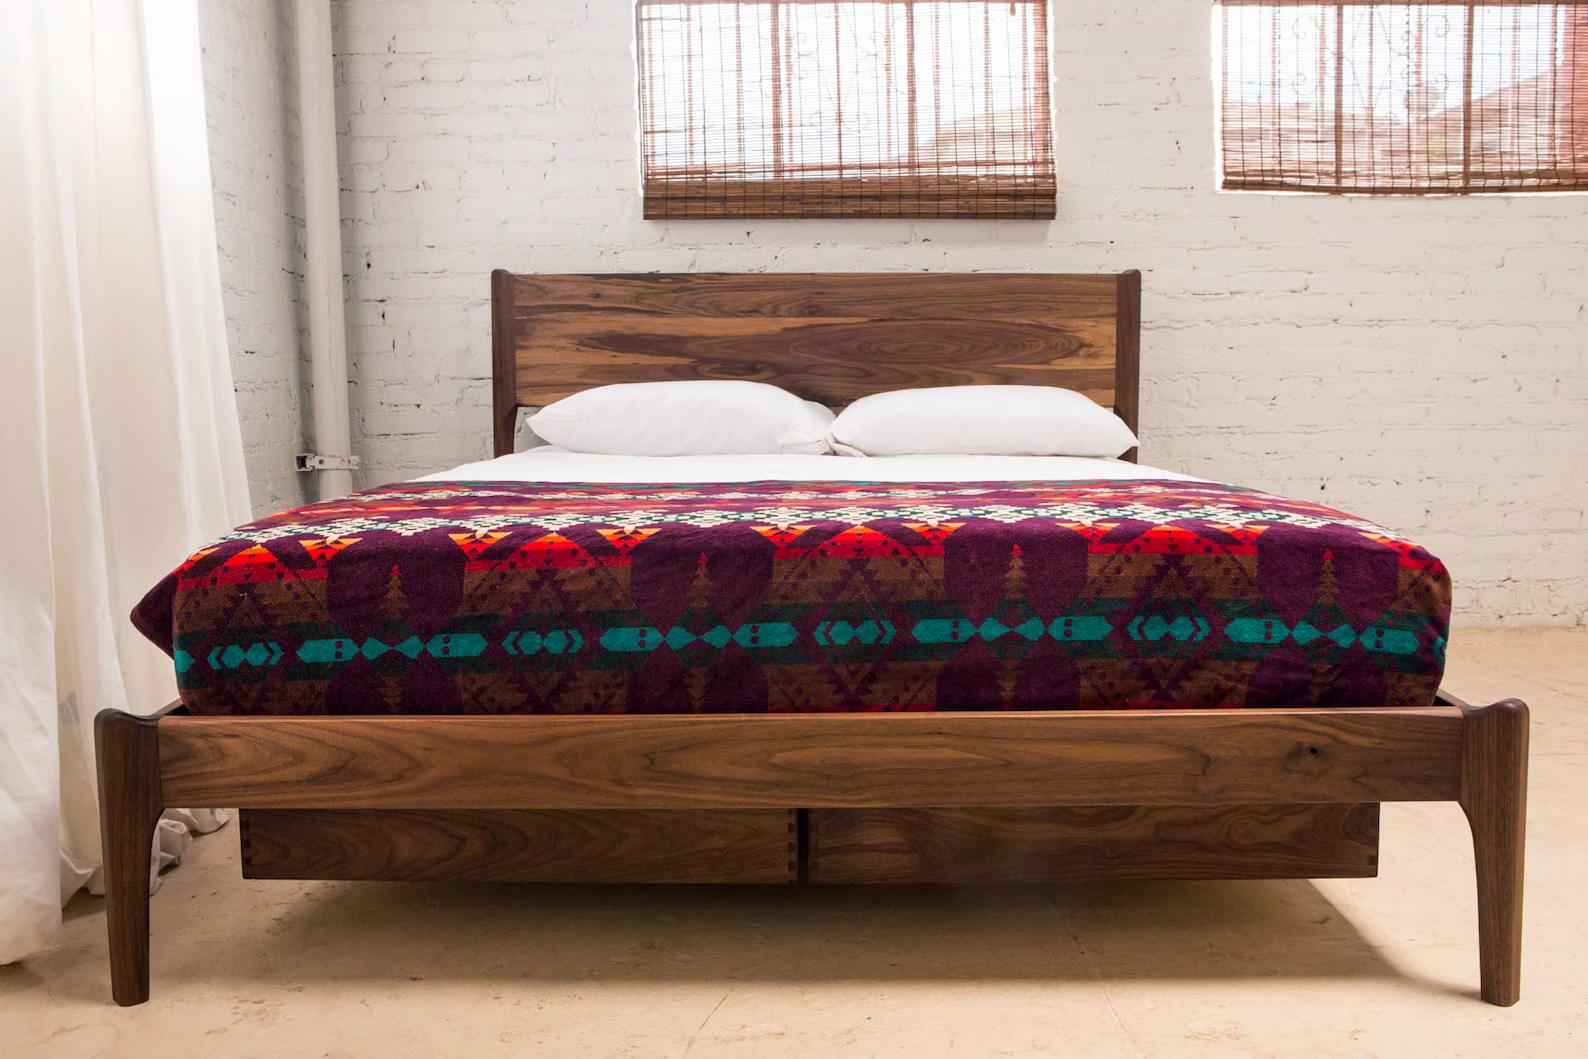 This bed is designed and hand-crafted by yours truly in Long Beach, Ca. The bed pictured is built from walnut, but I can use other woods upon request. The design is my own, inspired by a Mid Century/Danish modern aesthetic. All joinery is mortise